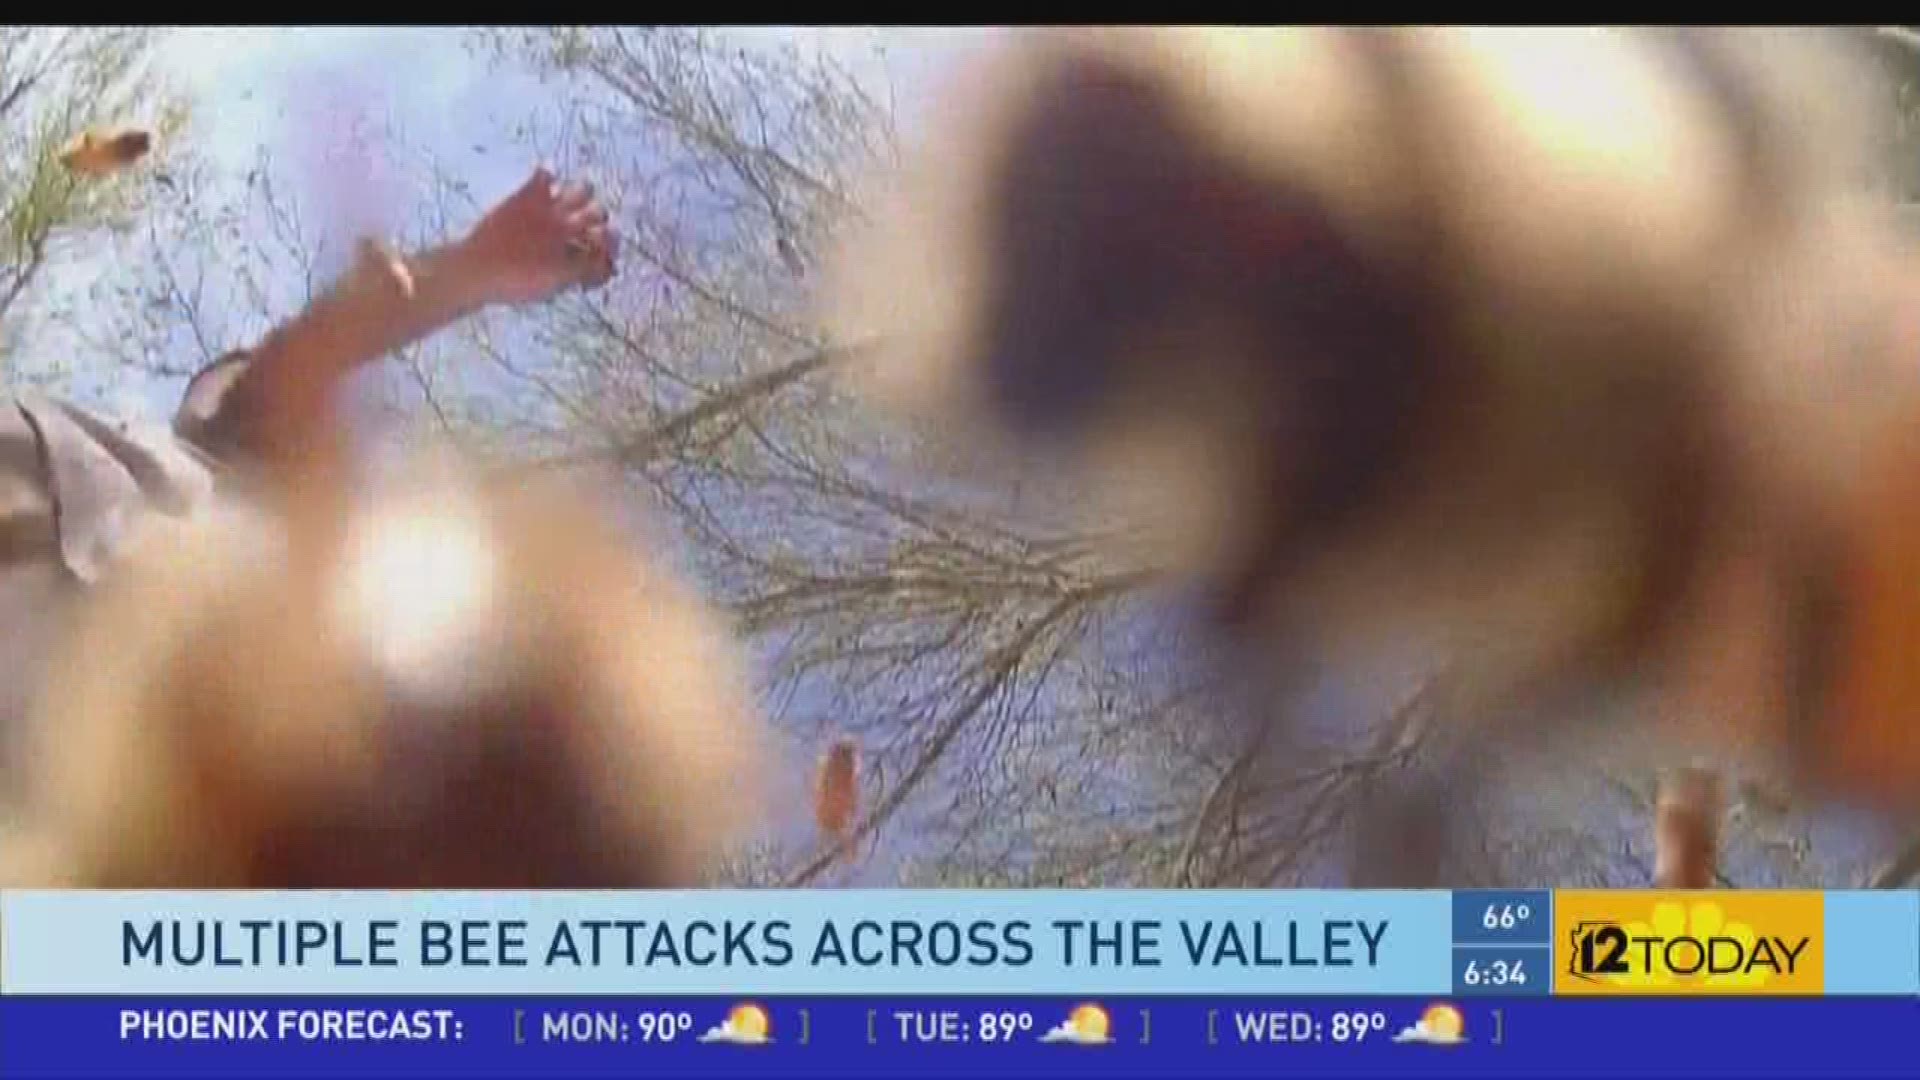 Experts warn people that swatting at swarming bees only aggravates them and increases your risk of being attacked.